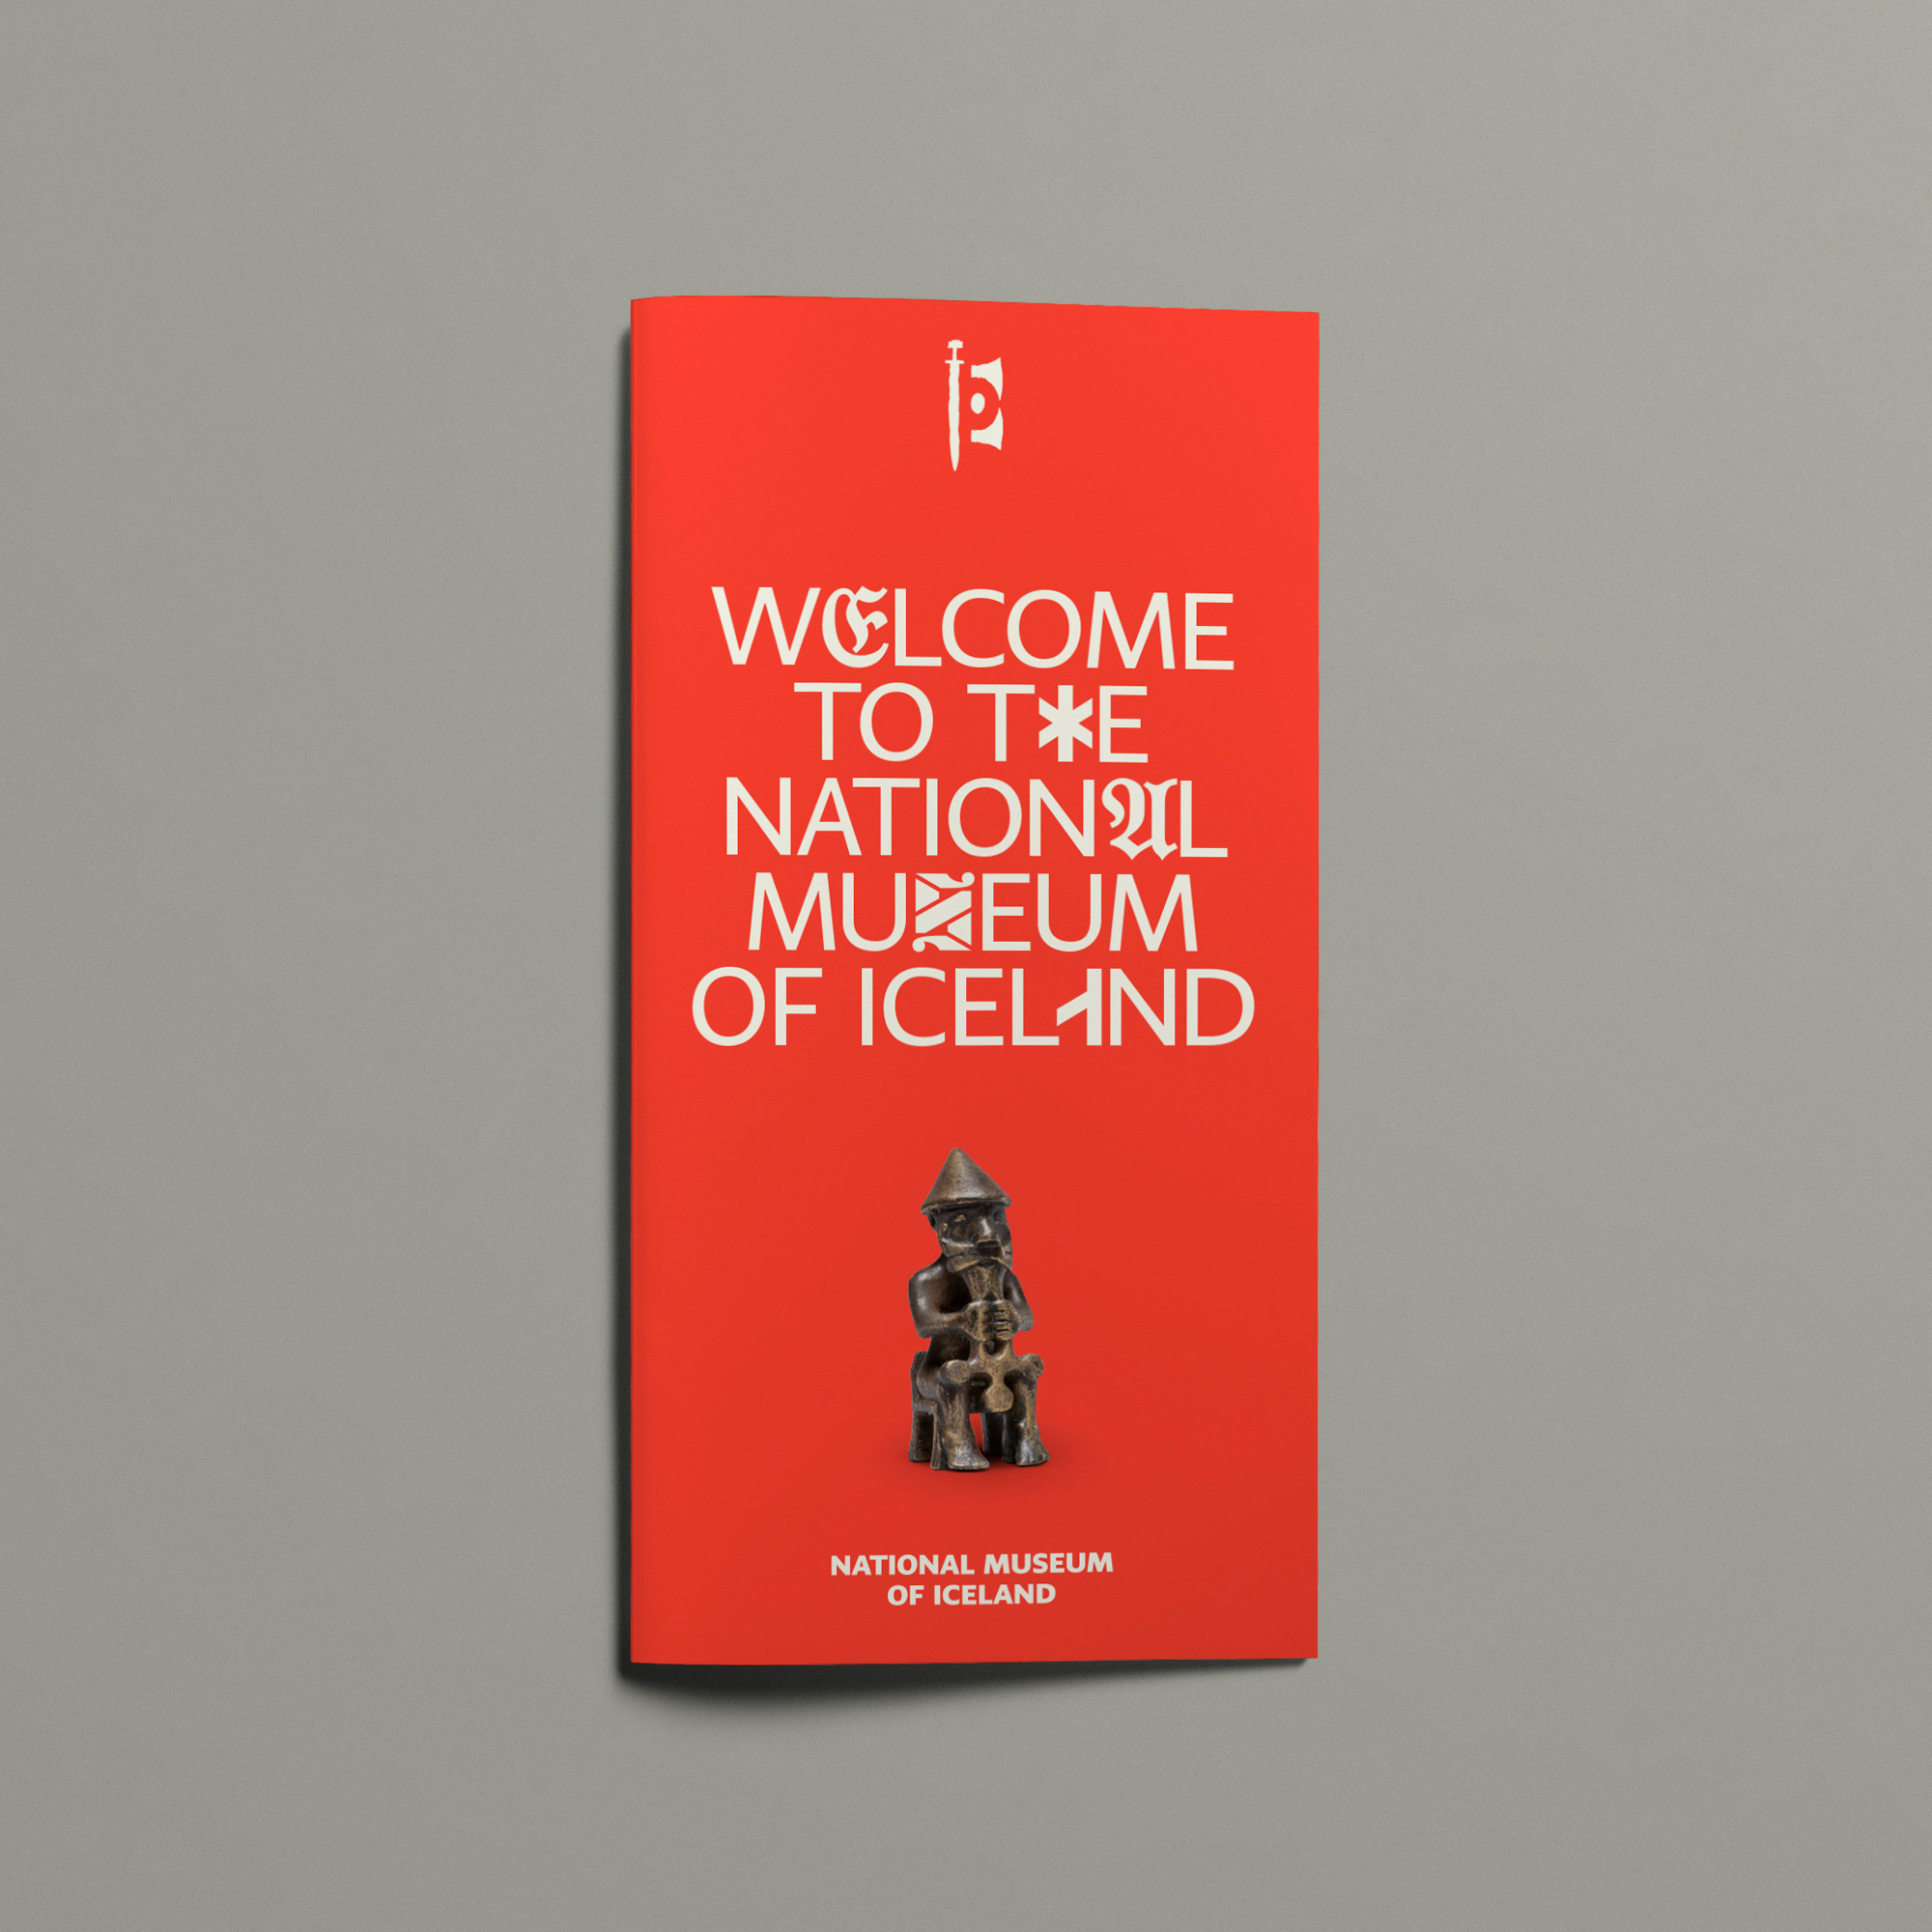 New Identity for National Museum of Iceland by Jonsson & Lemacks and Siggi Odds